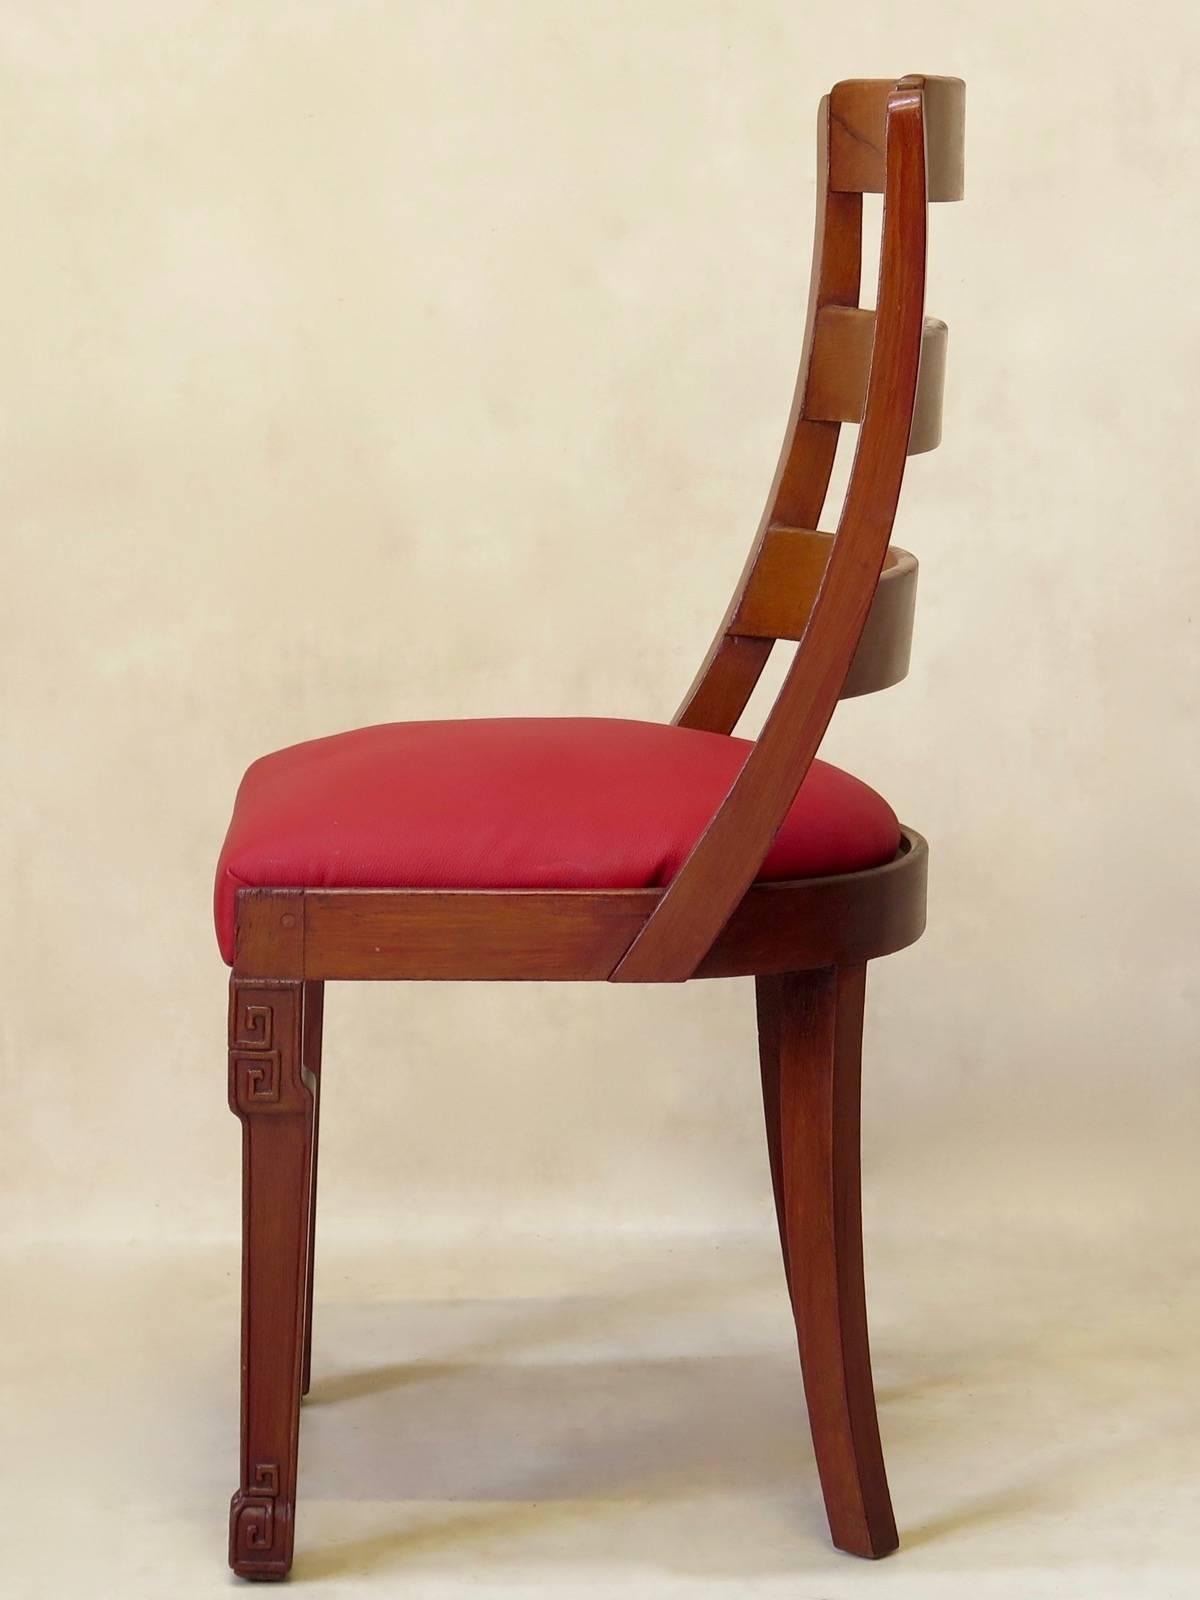 1930s dining chair styles